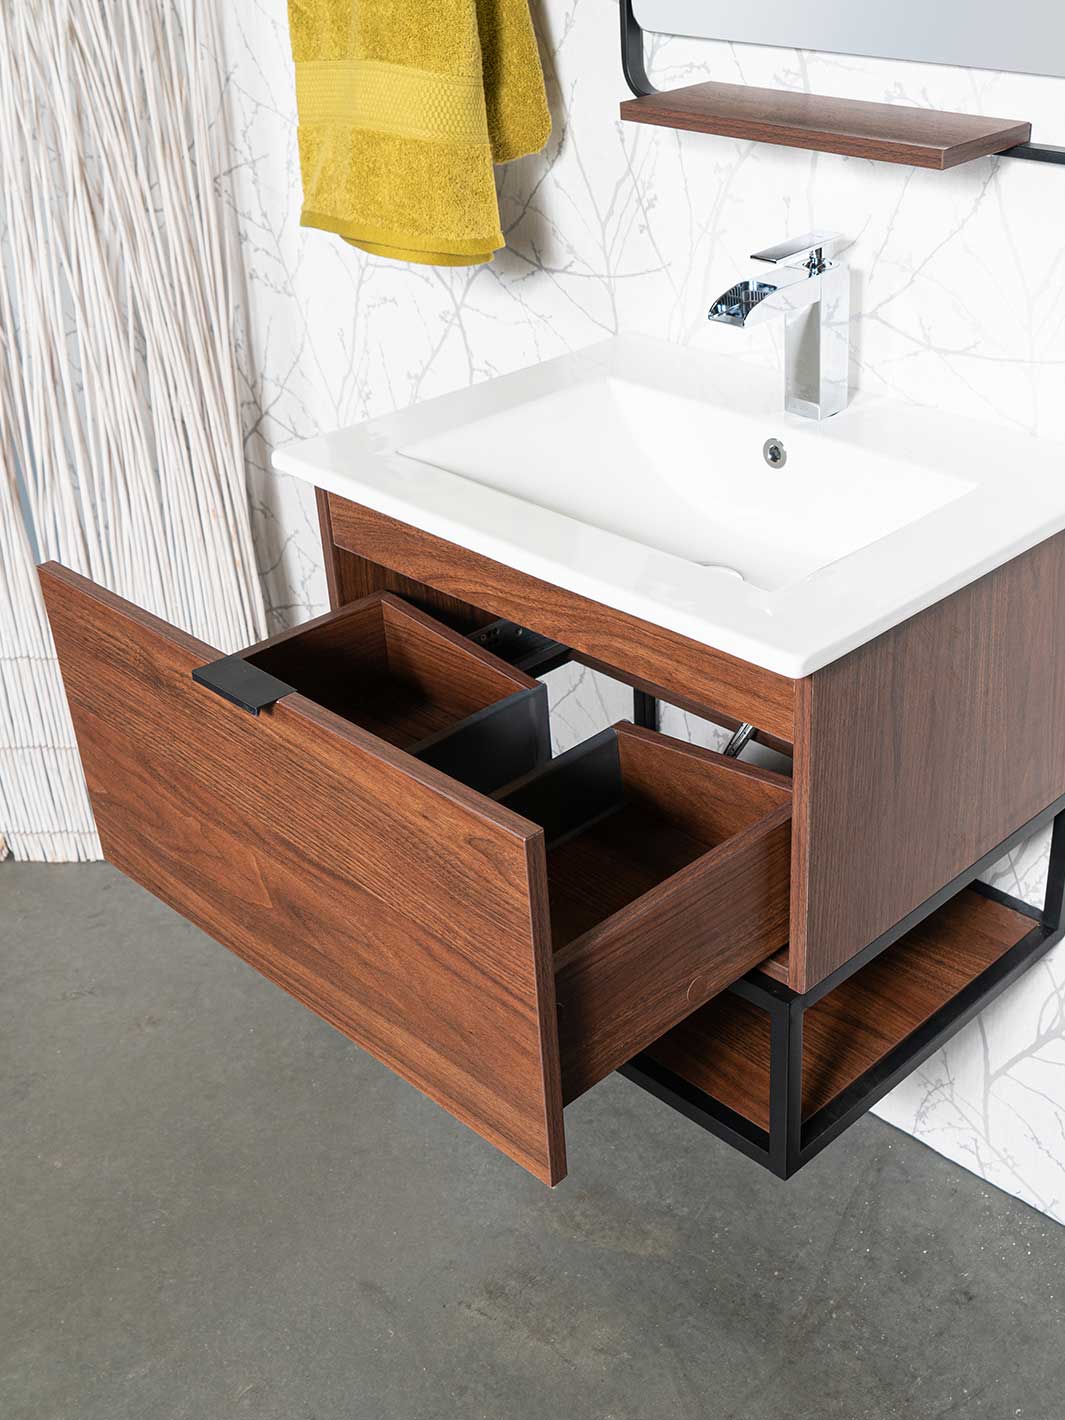 Drawer beneath sink and bottom shelf of floating style vanity with wood grain finish